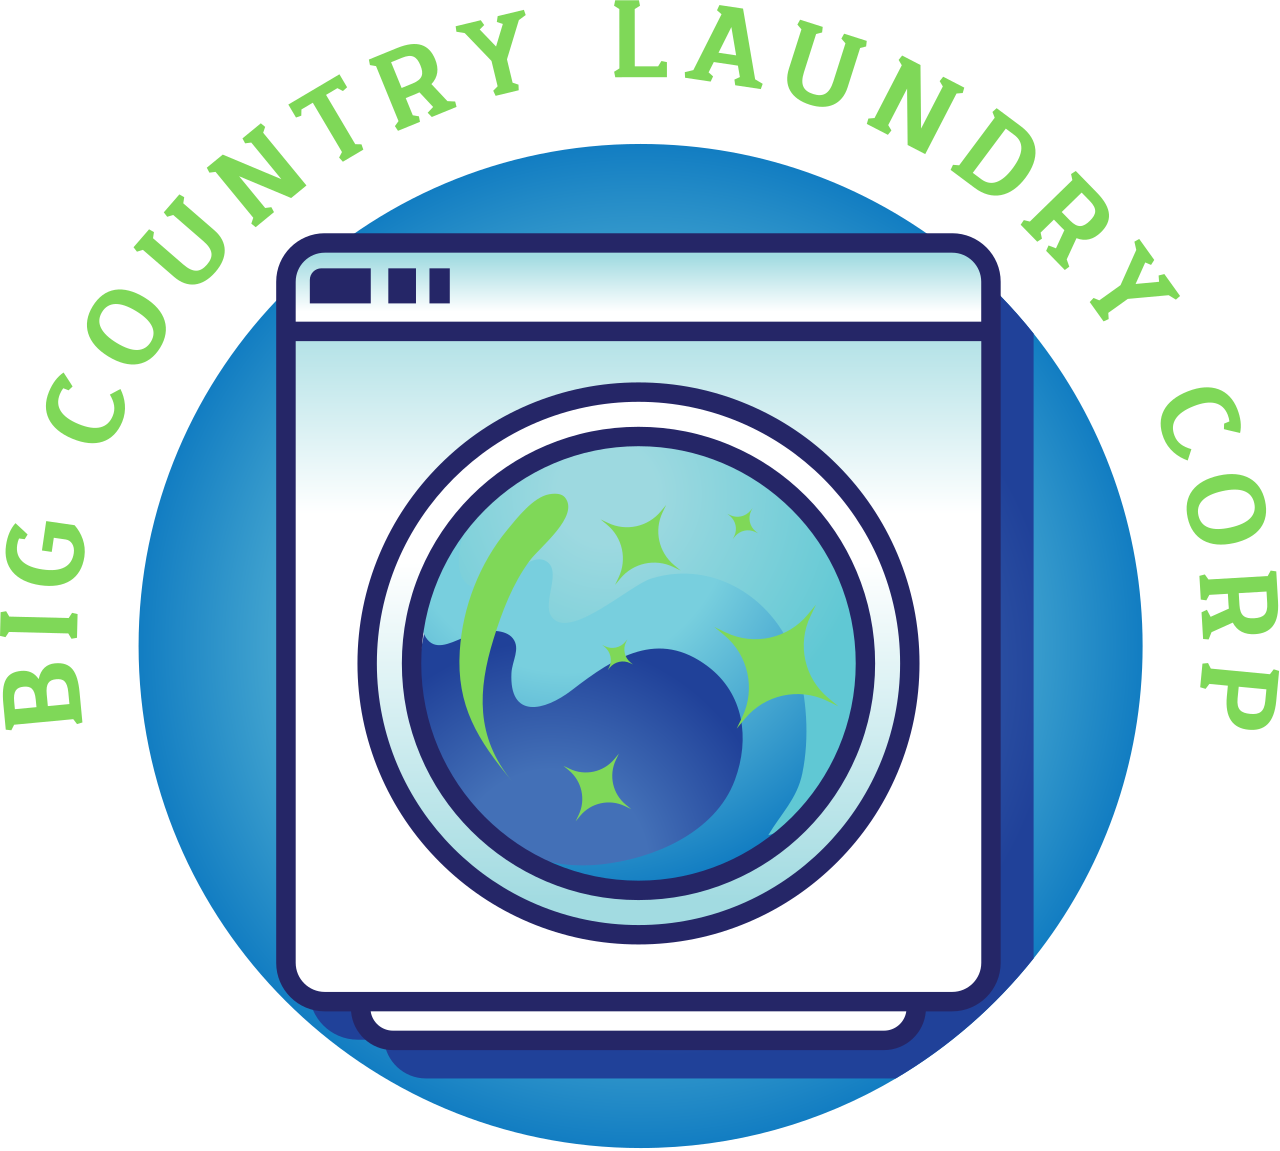 BIG COUNTRY LAUNDRY CORP's logo